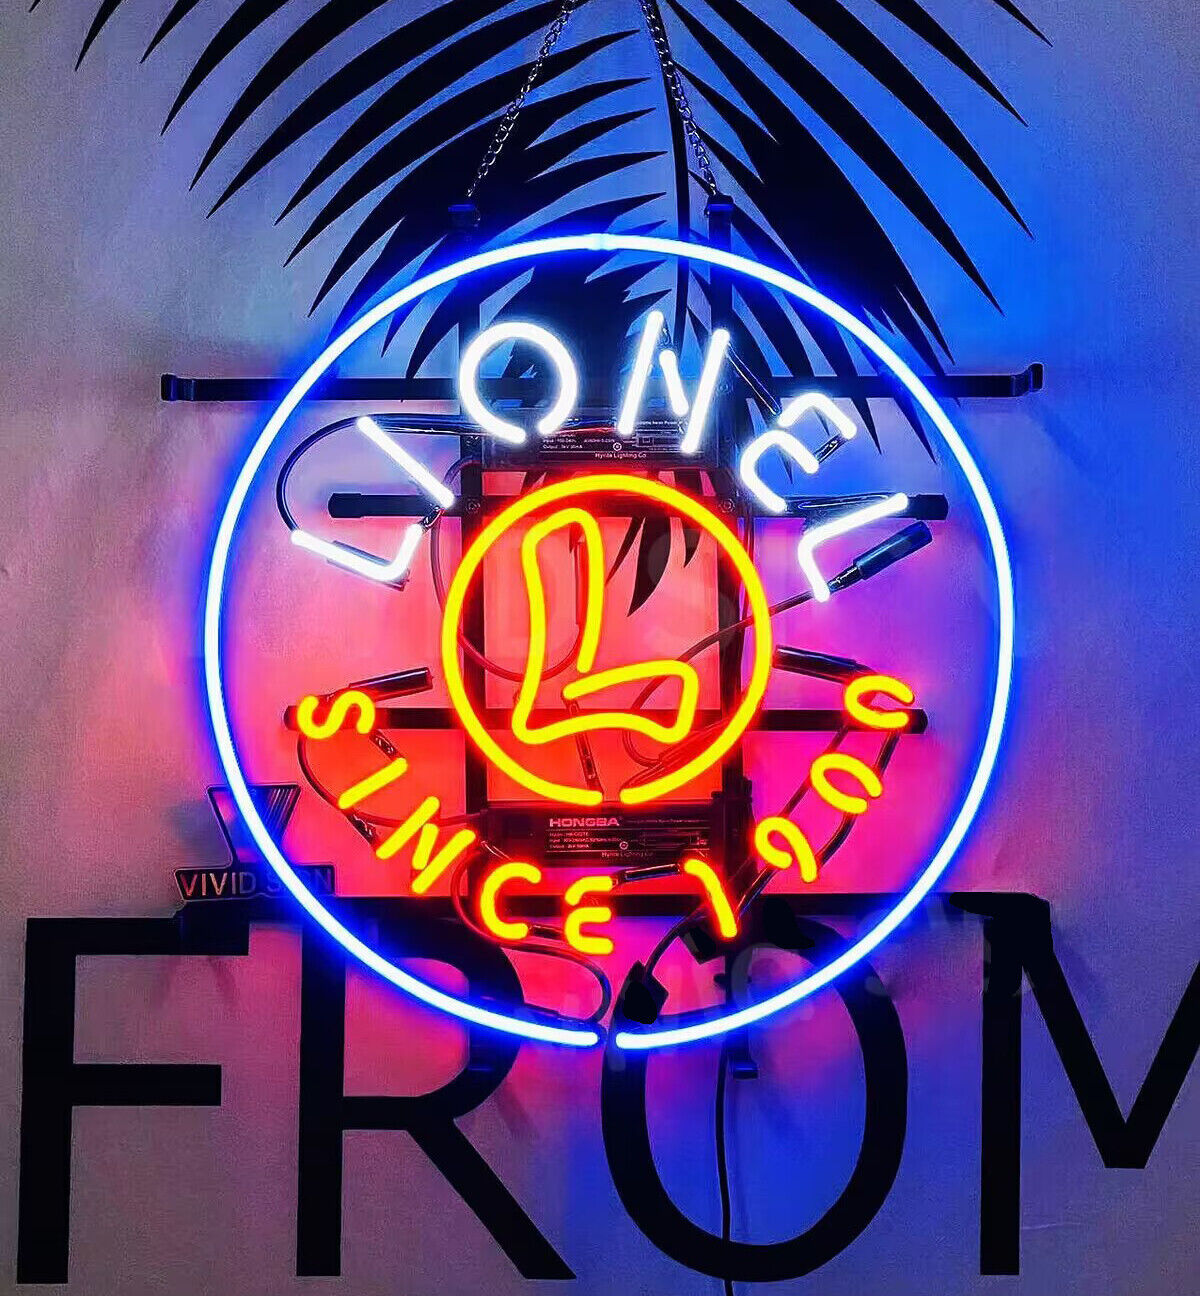 Lionel Since 1900 Neon Sign Beer Bar Pub Store Wall Decor 18x18